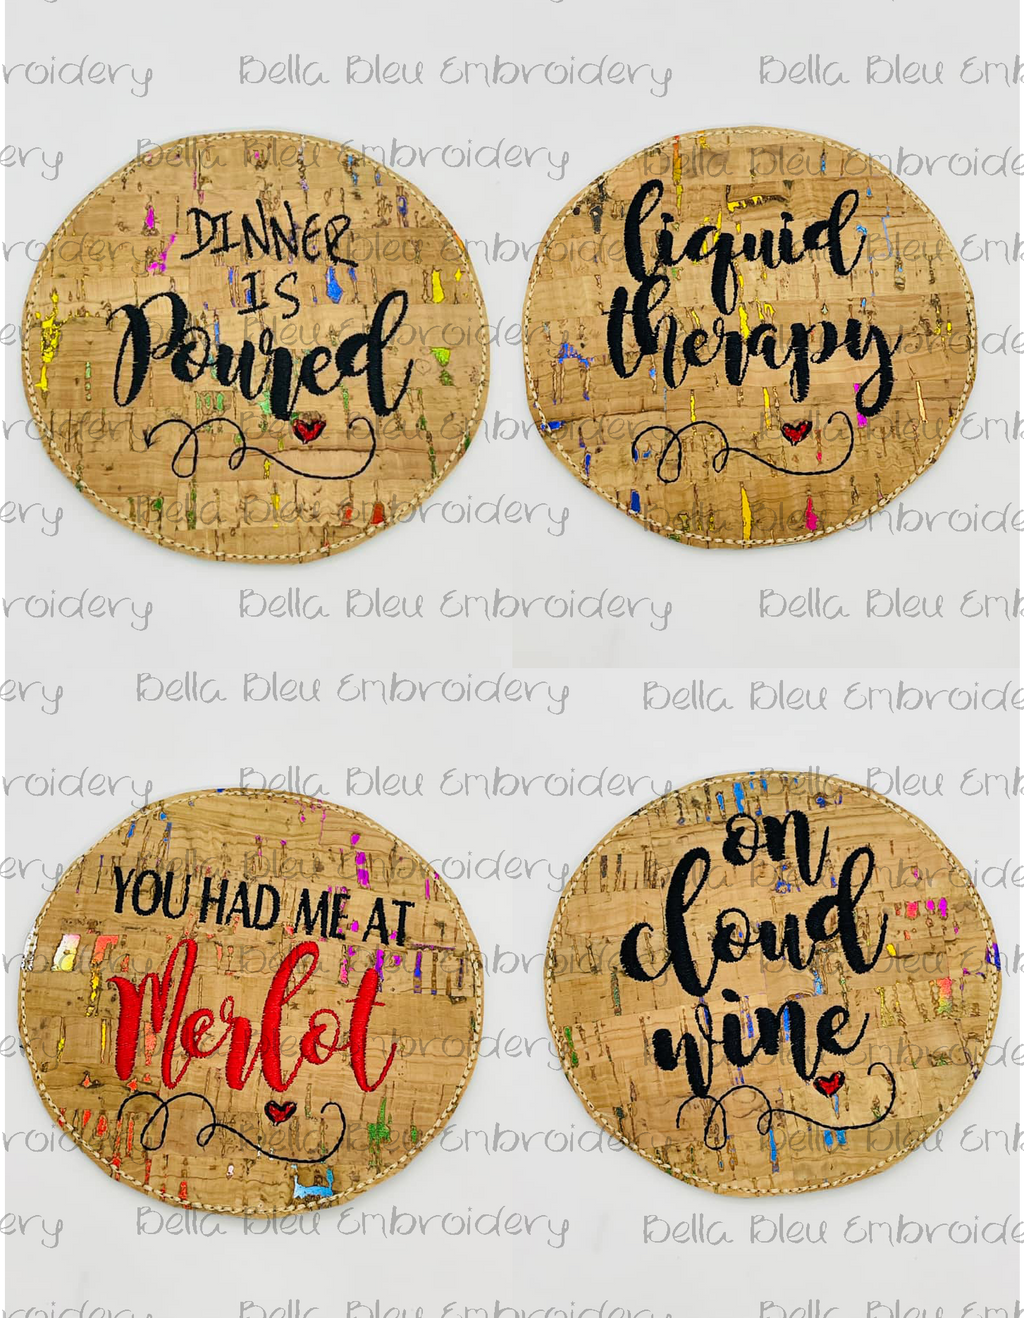 ITH Wine Therapy Coasters Set